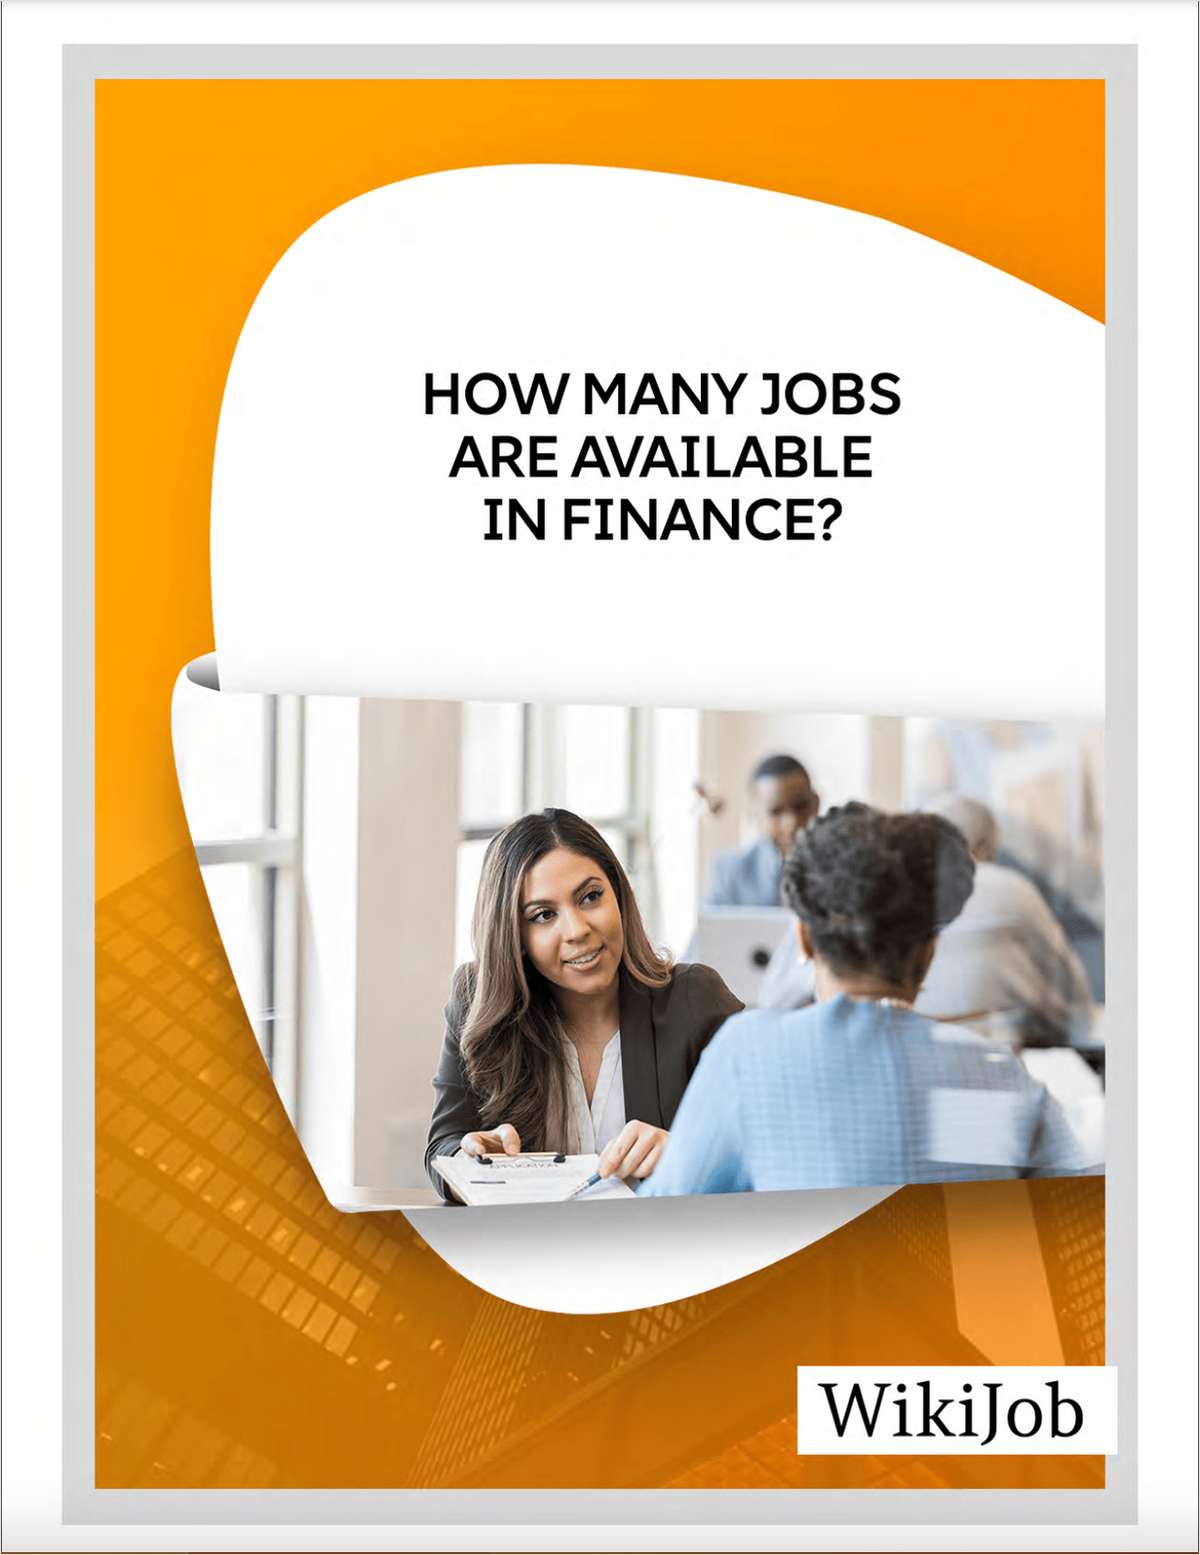 How Many Jobs Are Available in Finance?